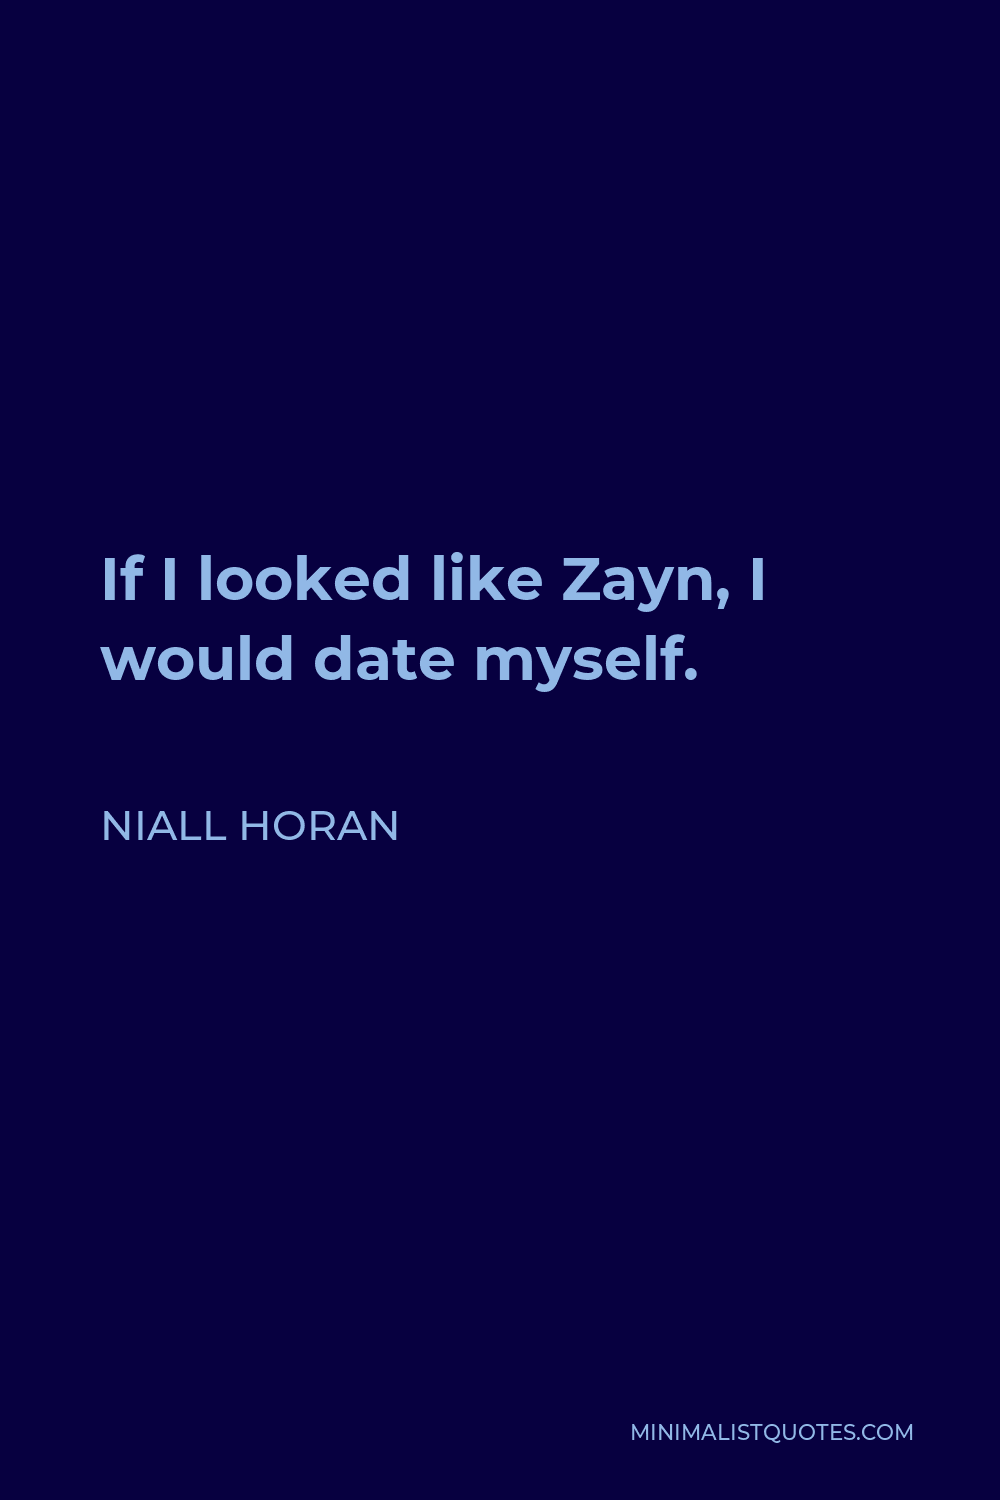 Niall Horan Quote - If I looked like Zayn, I would date myself.